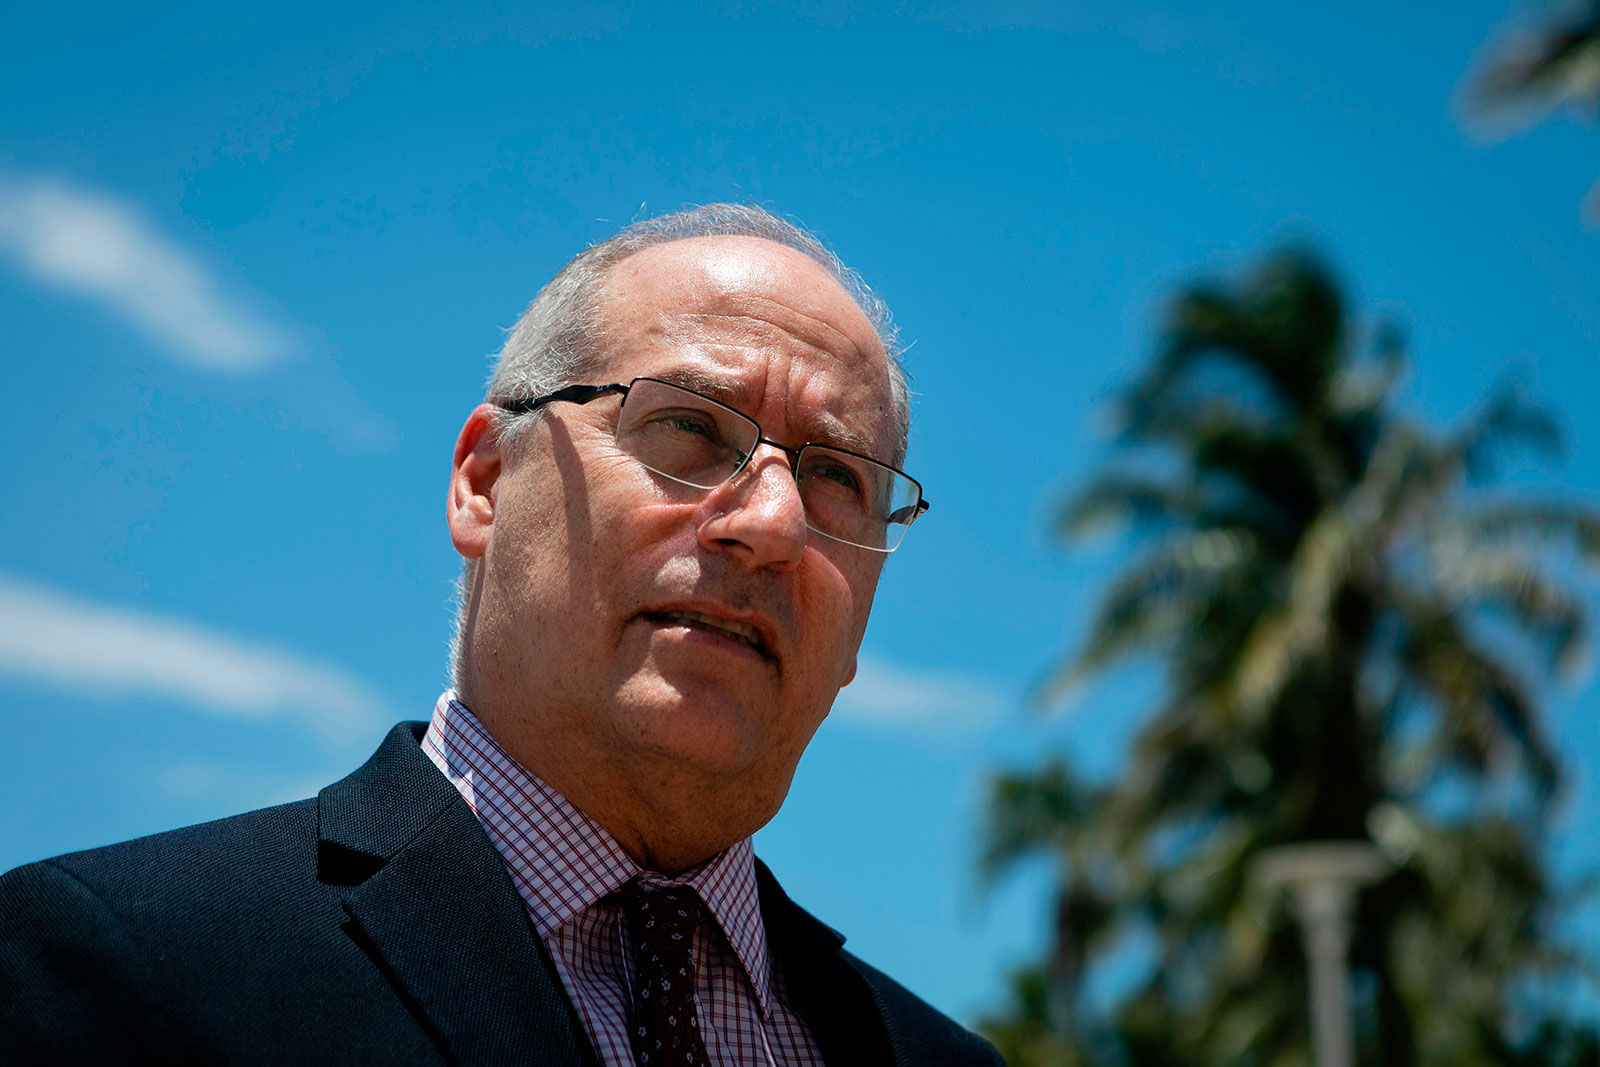 Miami Beach Mayor Dan Gelber speaks during an interview with the AFP in Miami Beach, Florida, on June 16.